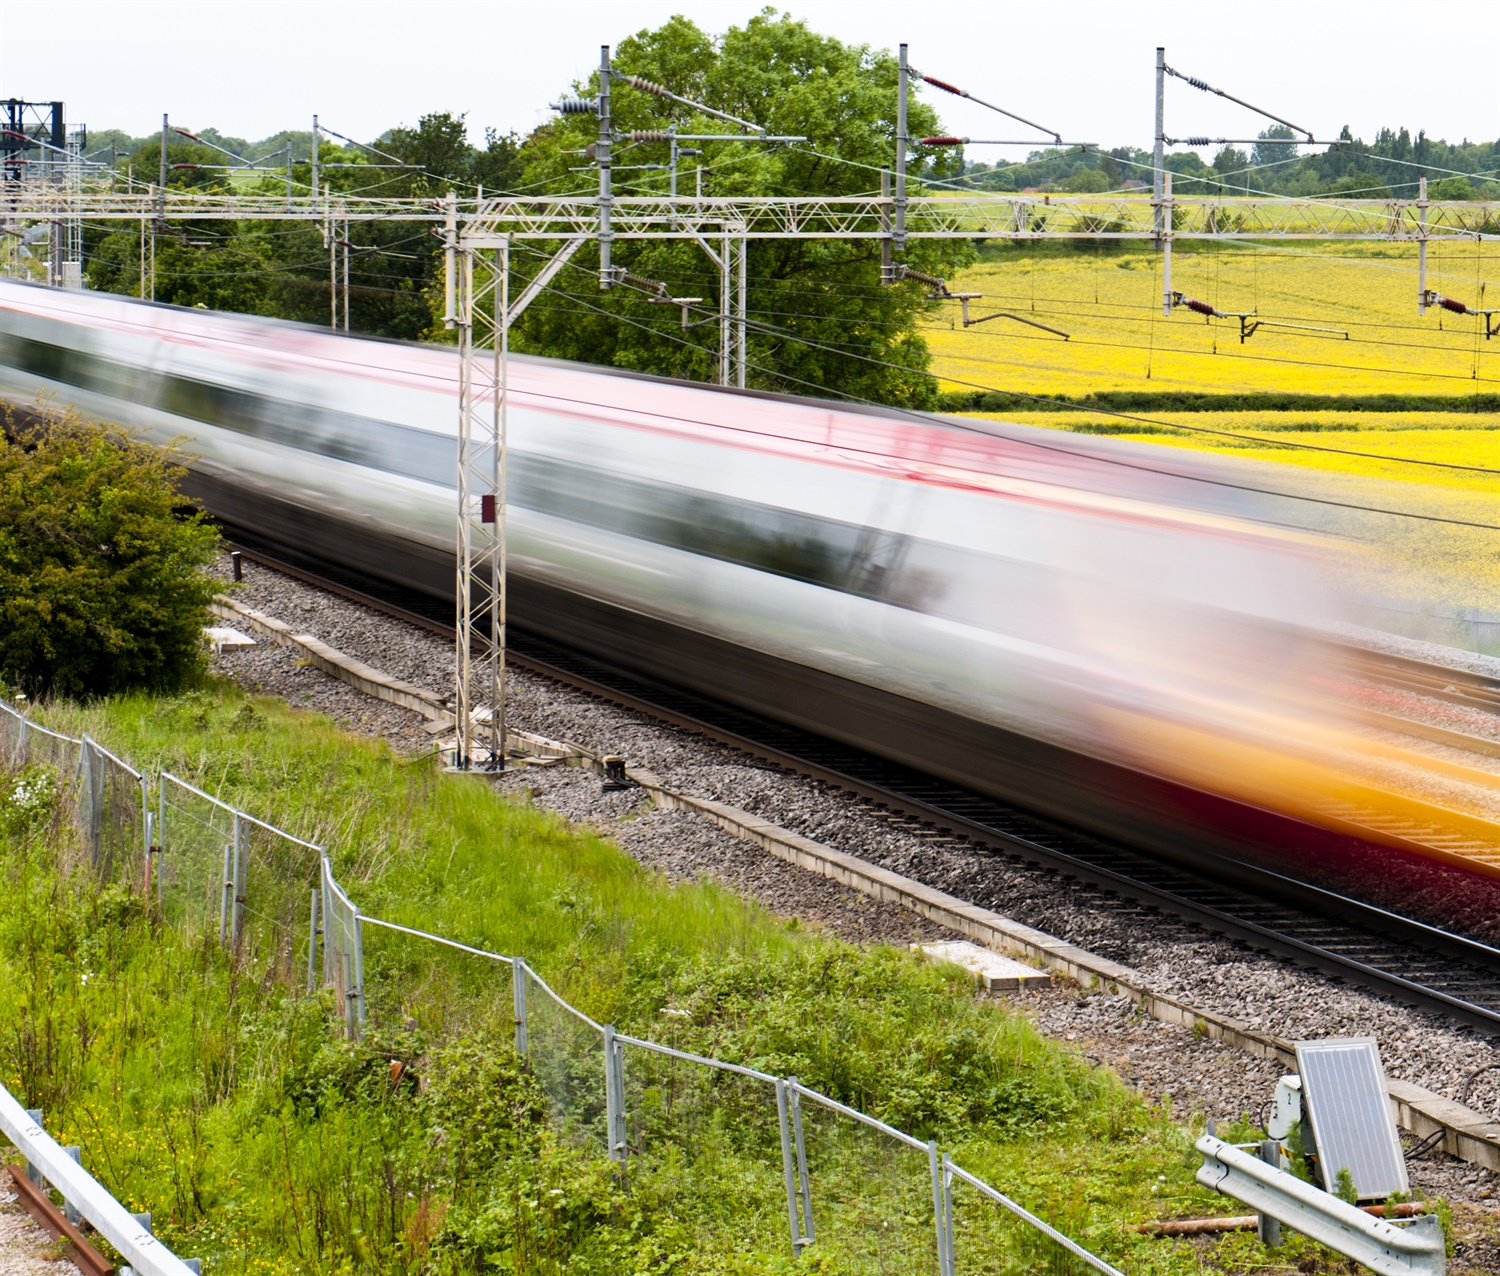 £1.8m government investment on way for HS2 station in East Midlands